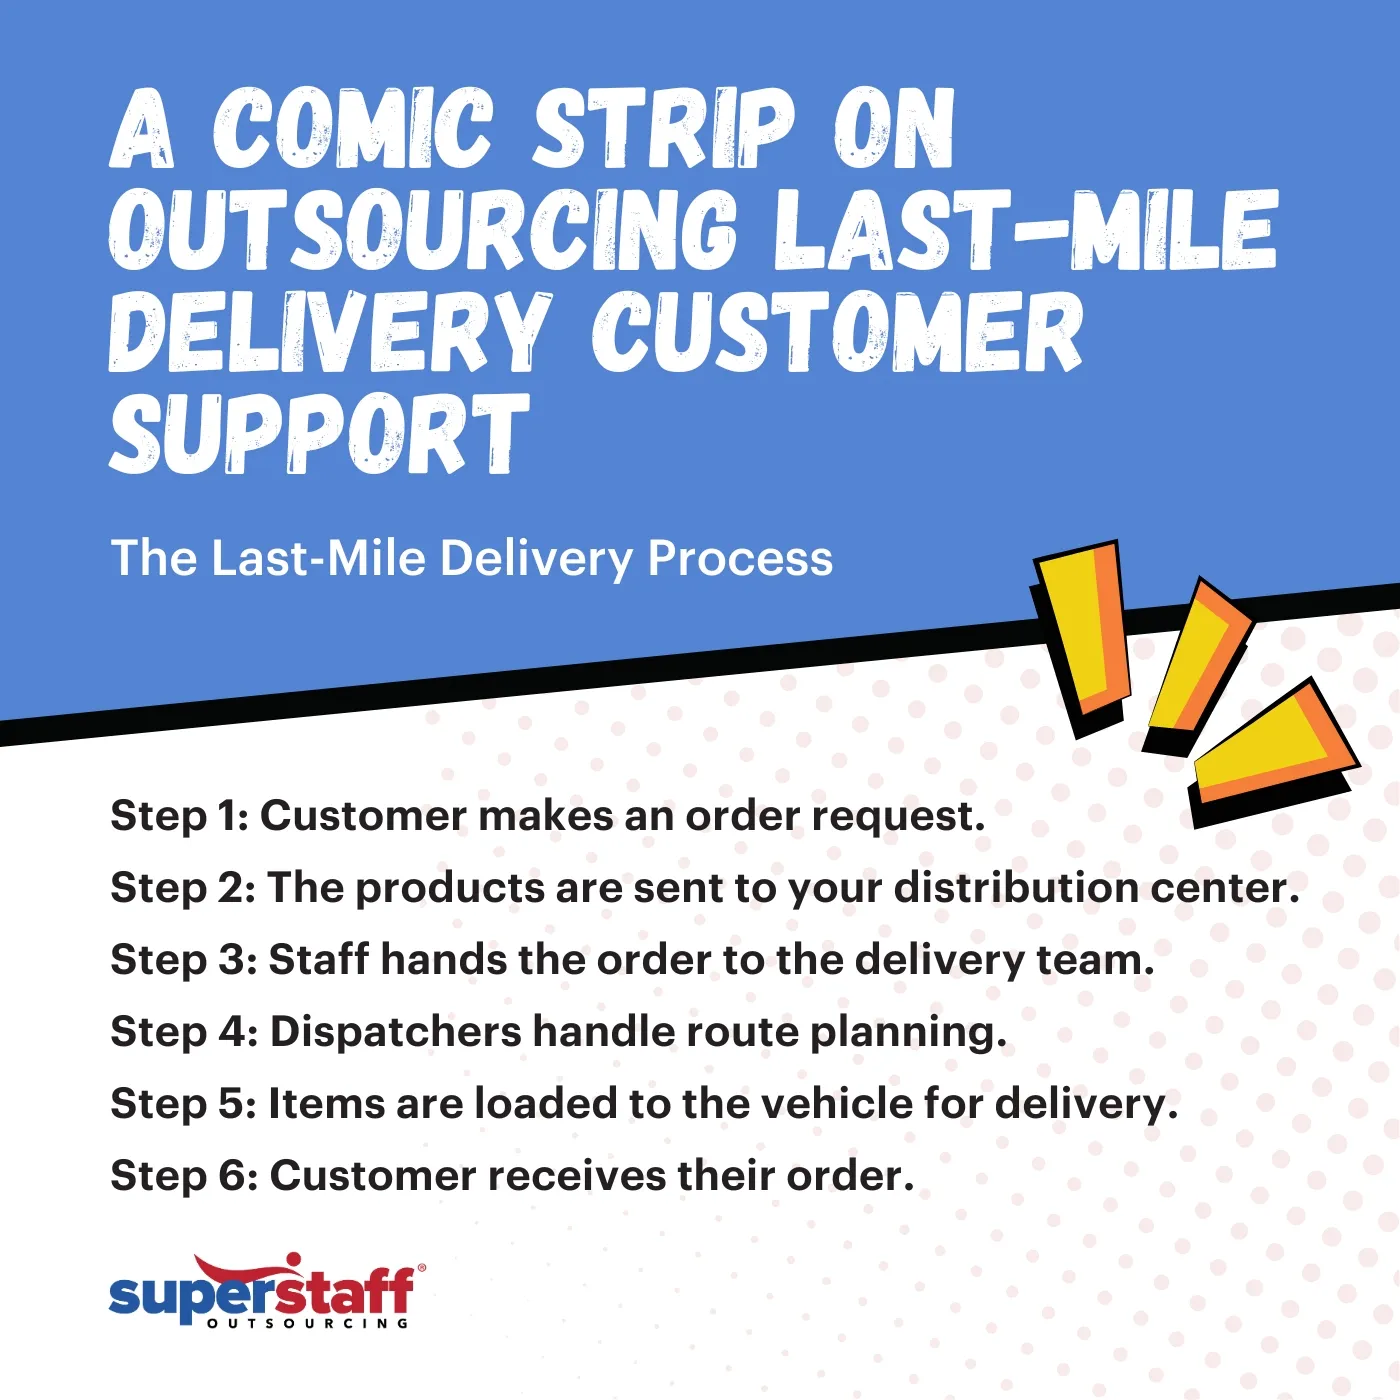 An image caption reads: A Comic Strip On Outsourcing Last-Mile Delivery Customer Support.